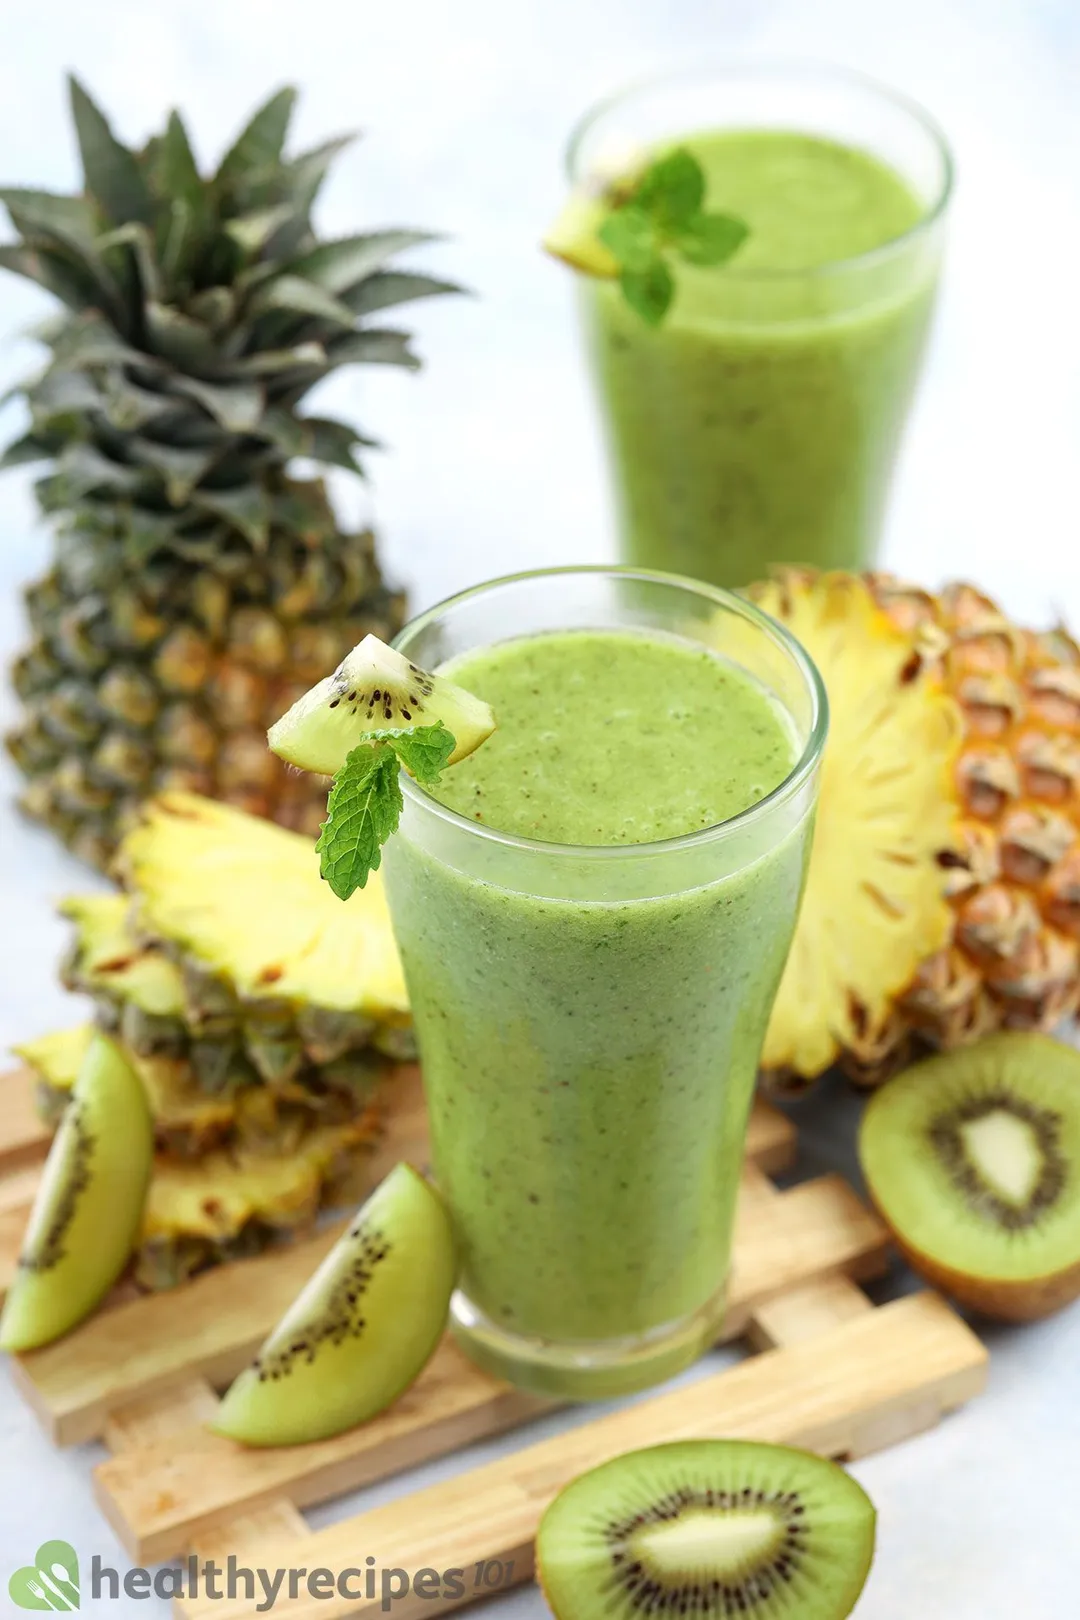 Two glasses of Pineapple Kiwi Smoothie placed on a wooden plank along with slices of pineapple and green kiwi.